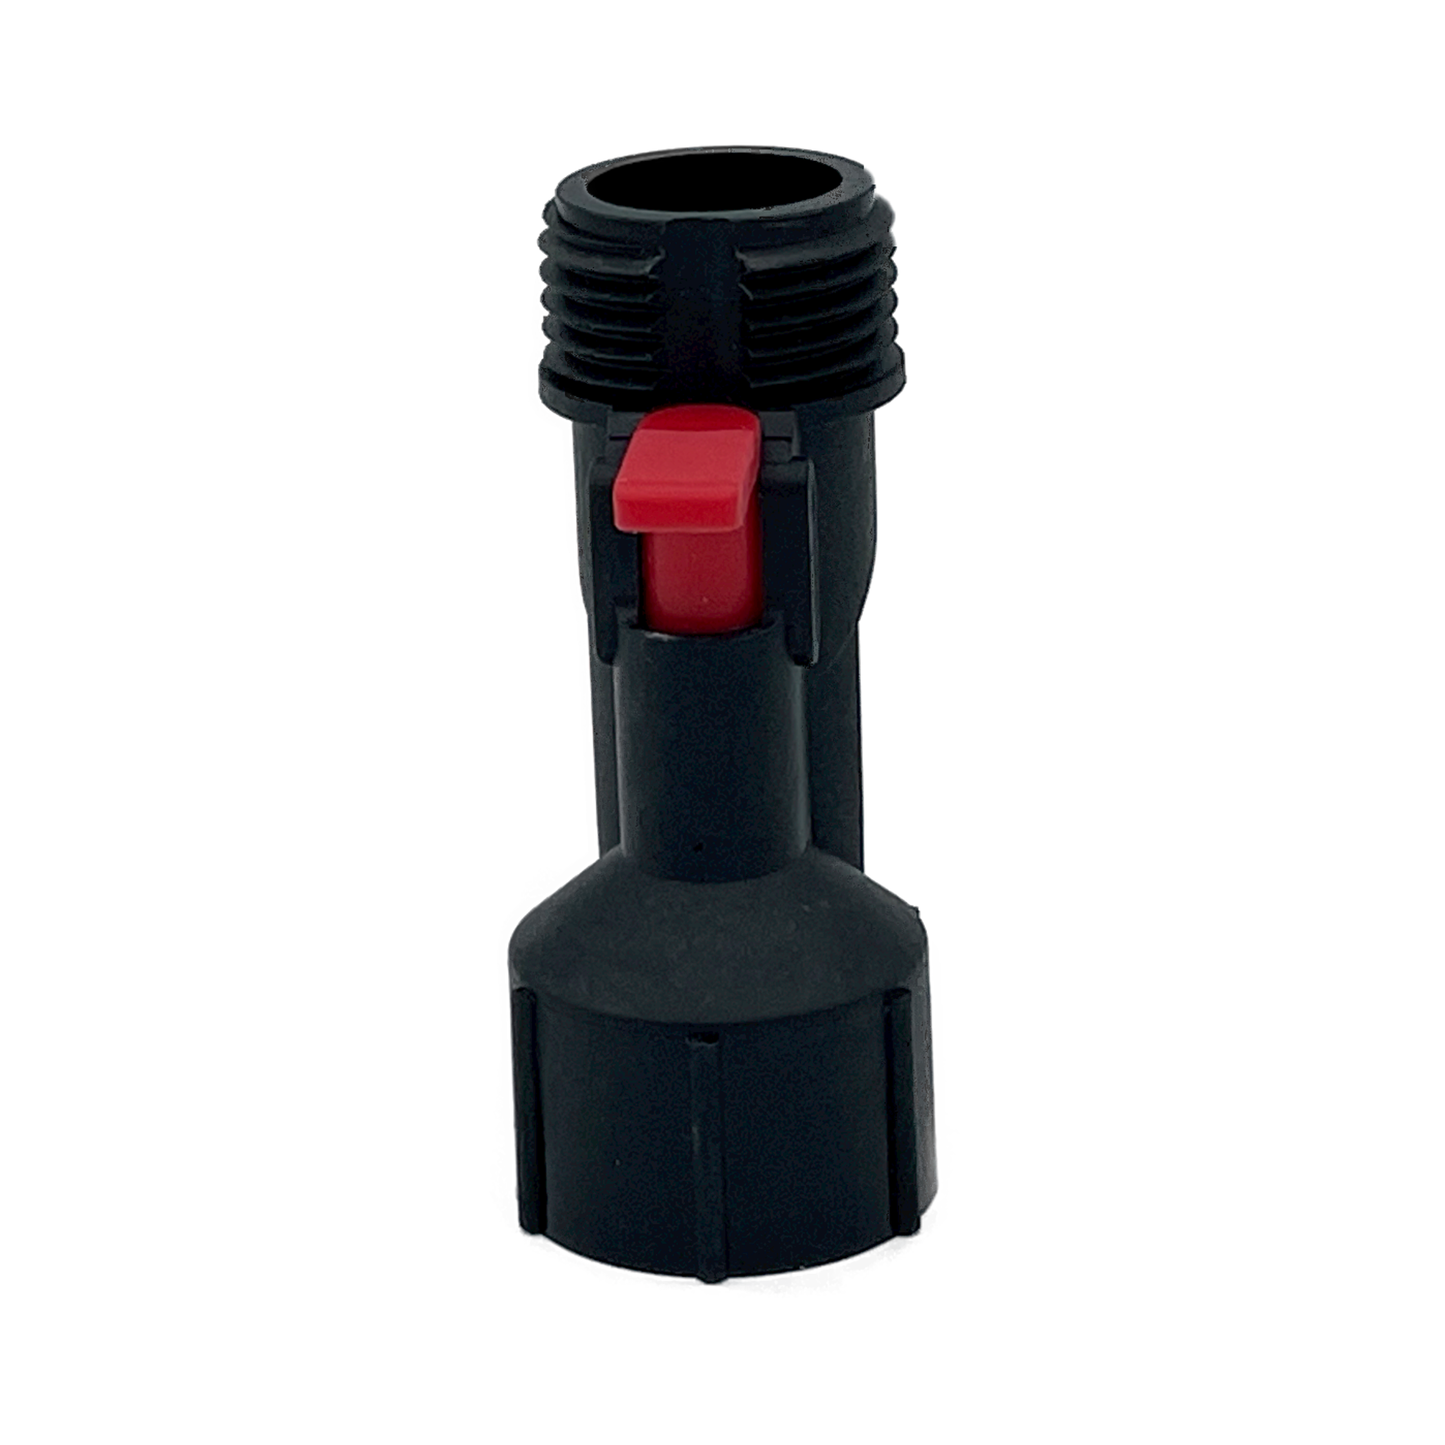 Black Water Block Reset Tool and red reset lever. Connects to the downstream side of the Water Block. Device makes it easy to resume water flow if the Water Block shutoff activates and stops water. 